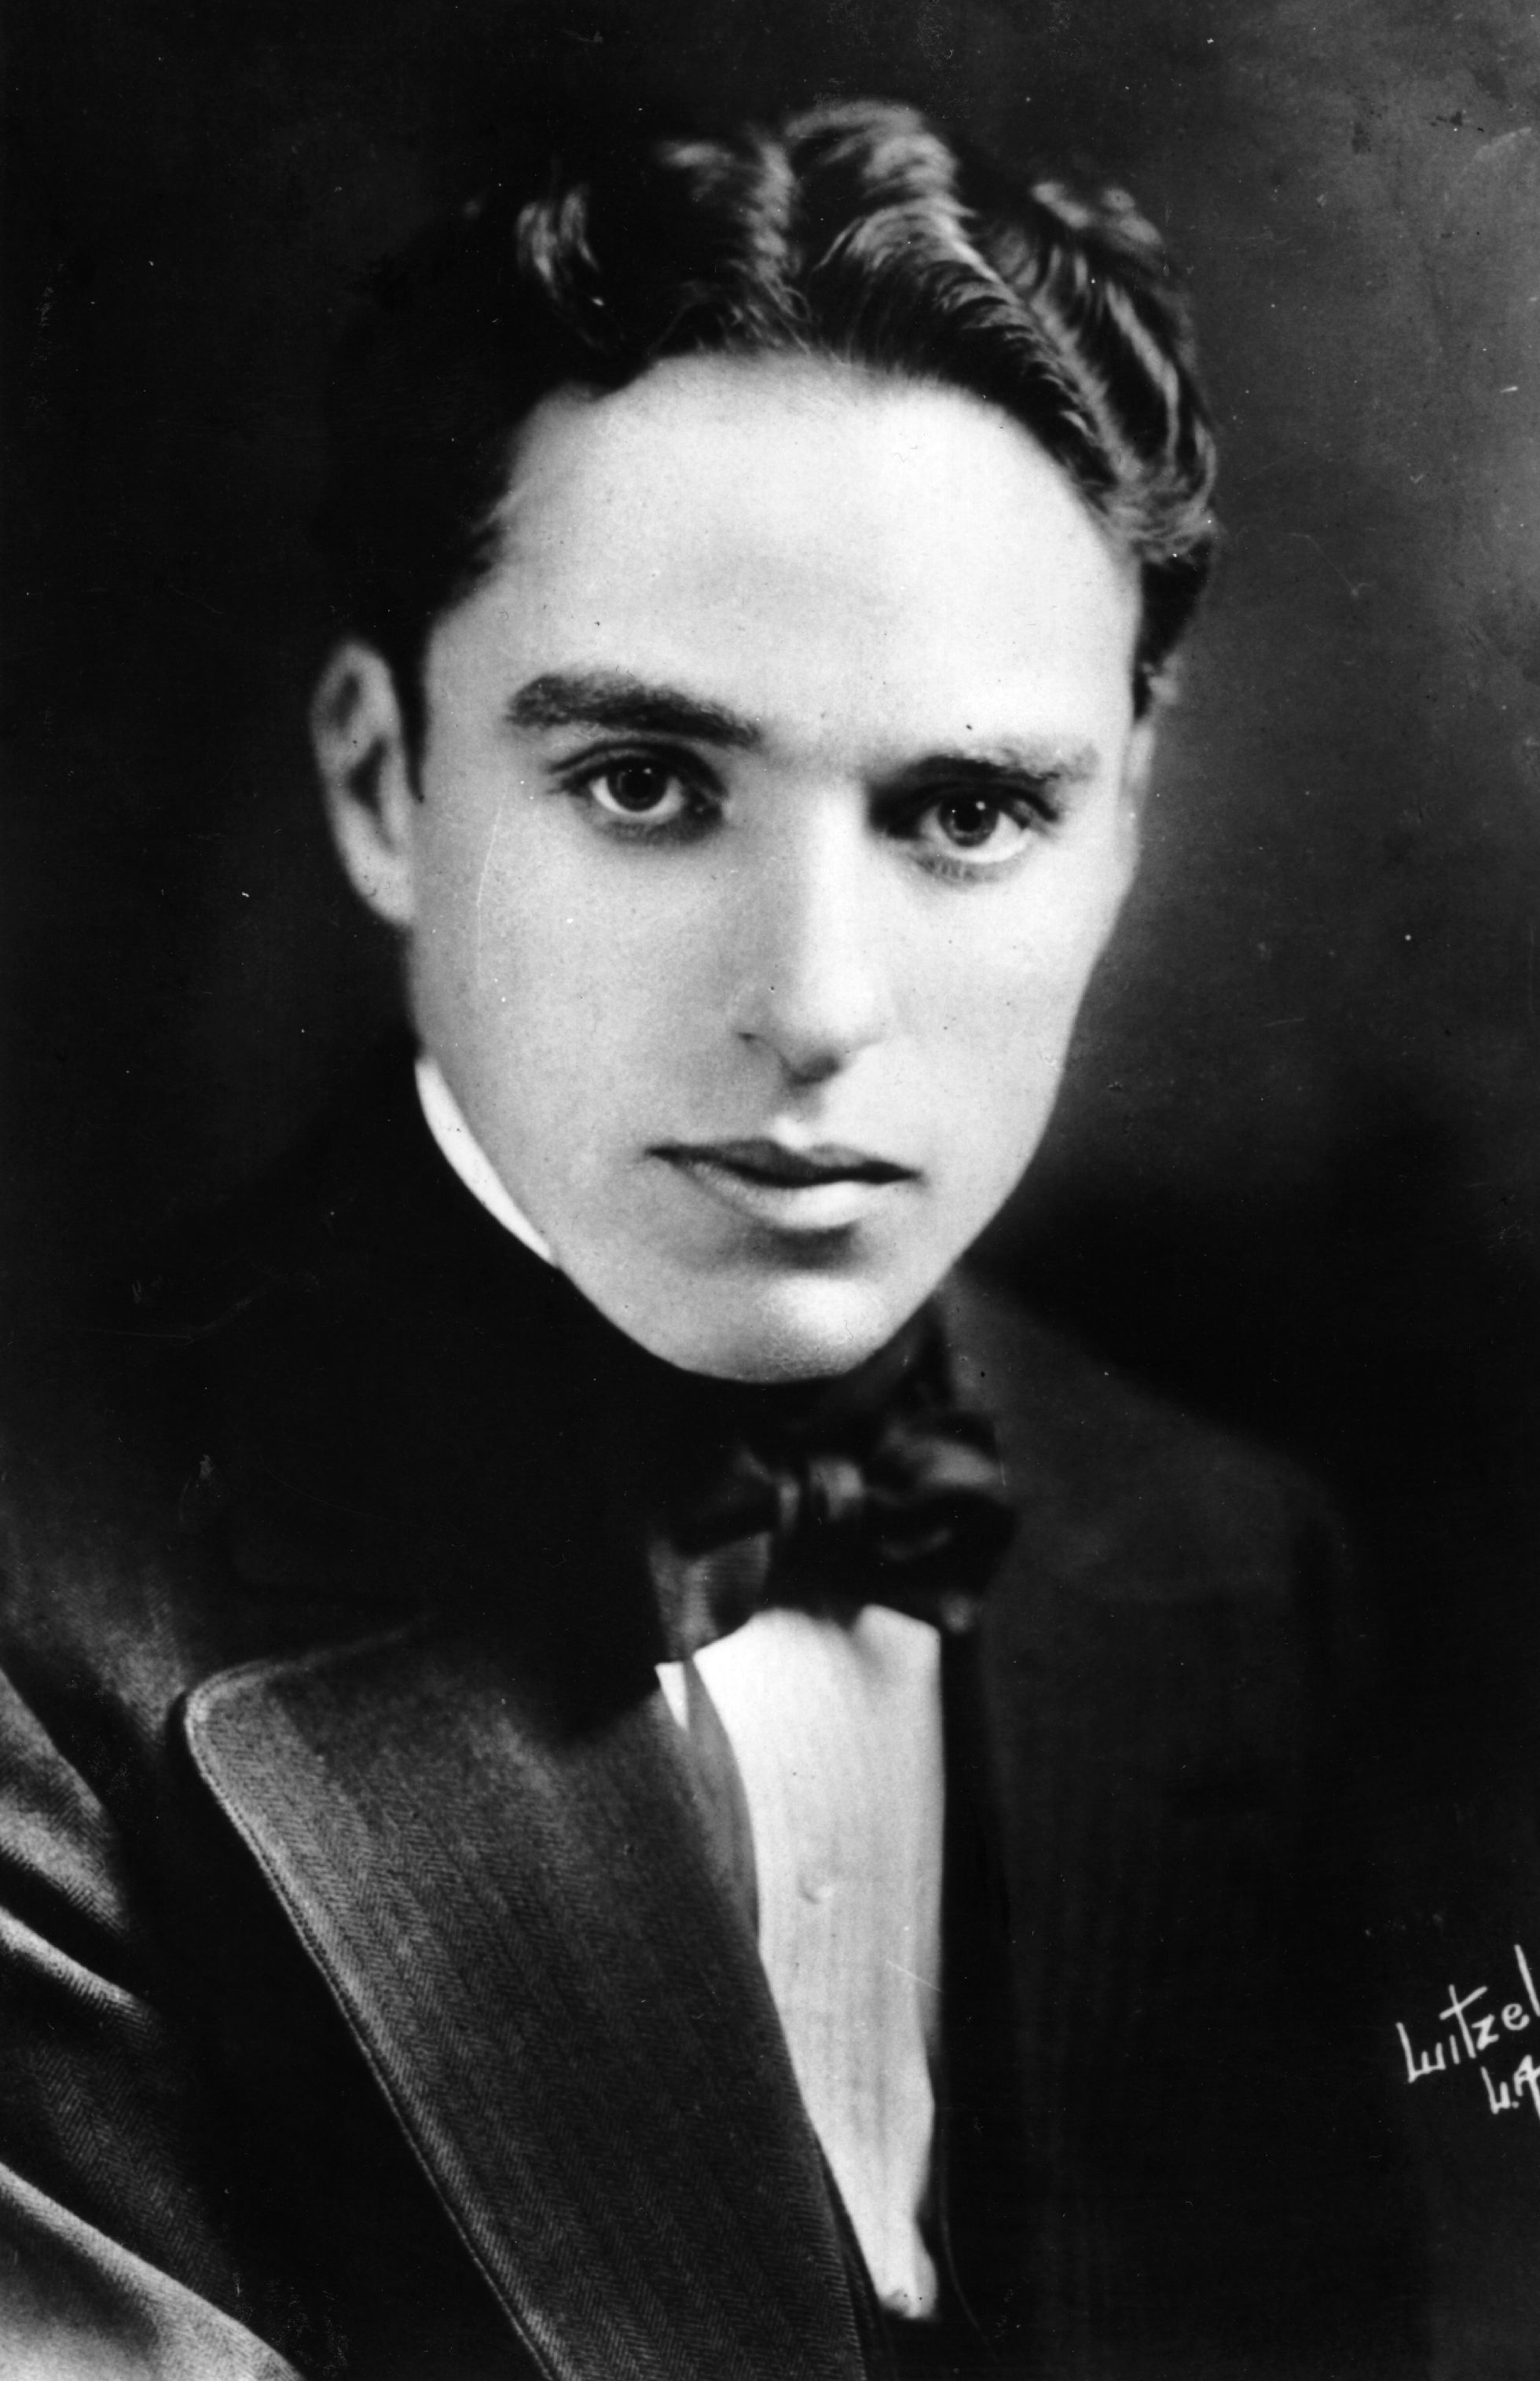 Charles Spencer Chaplin posing for a photo circa 1914 | Source: Getty Images